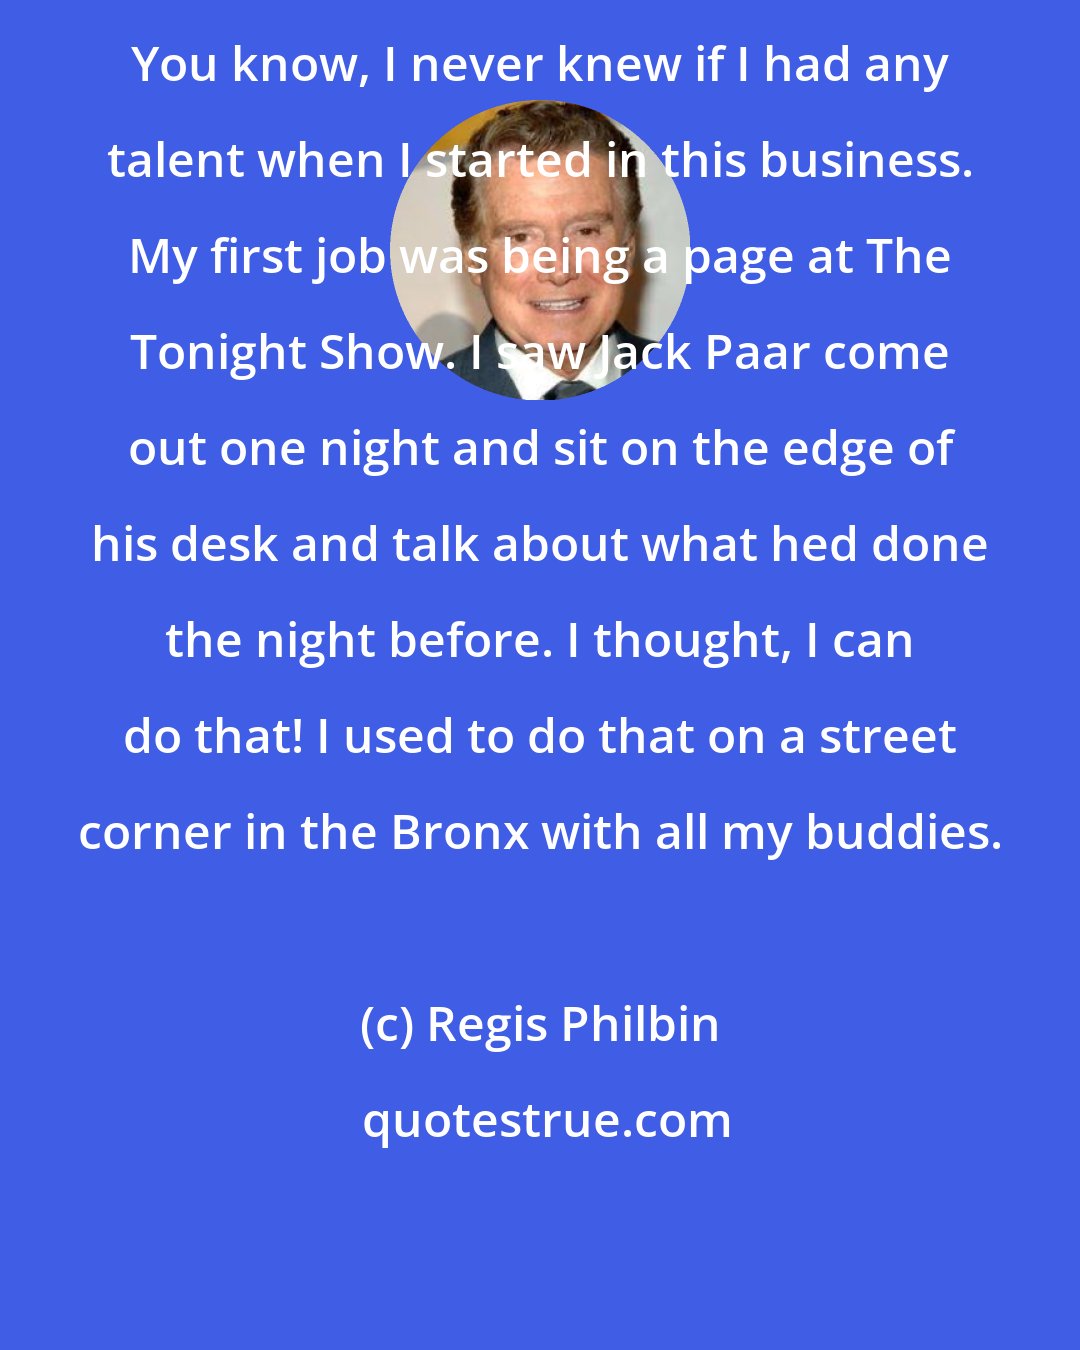 Regis Philbin: You know, I never knew if I had any talent when I started in this business. My first job was being a page at The Tonight Show. I saw Jack Paar come out one night and sit on the edge of his desk and talk about what hed done the night before. I thought, I can do that! I used to do that on a street corner in the Bronx with all my buddies.